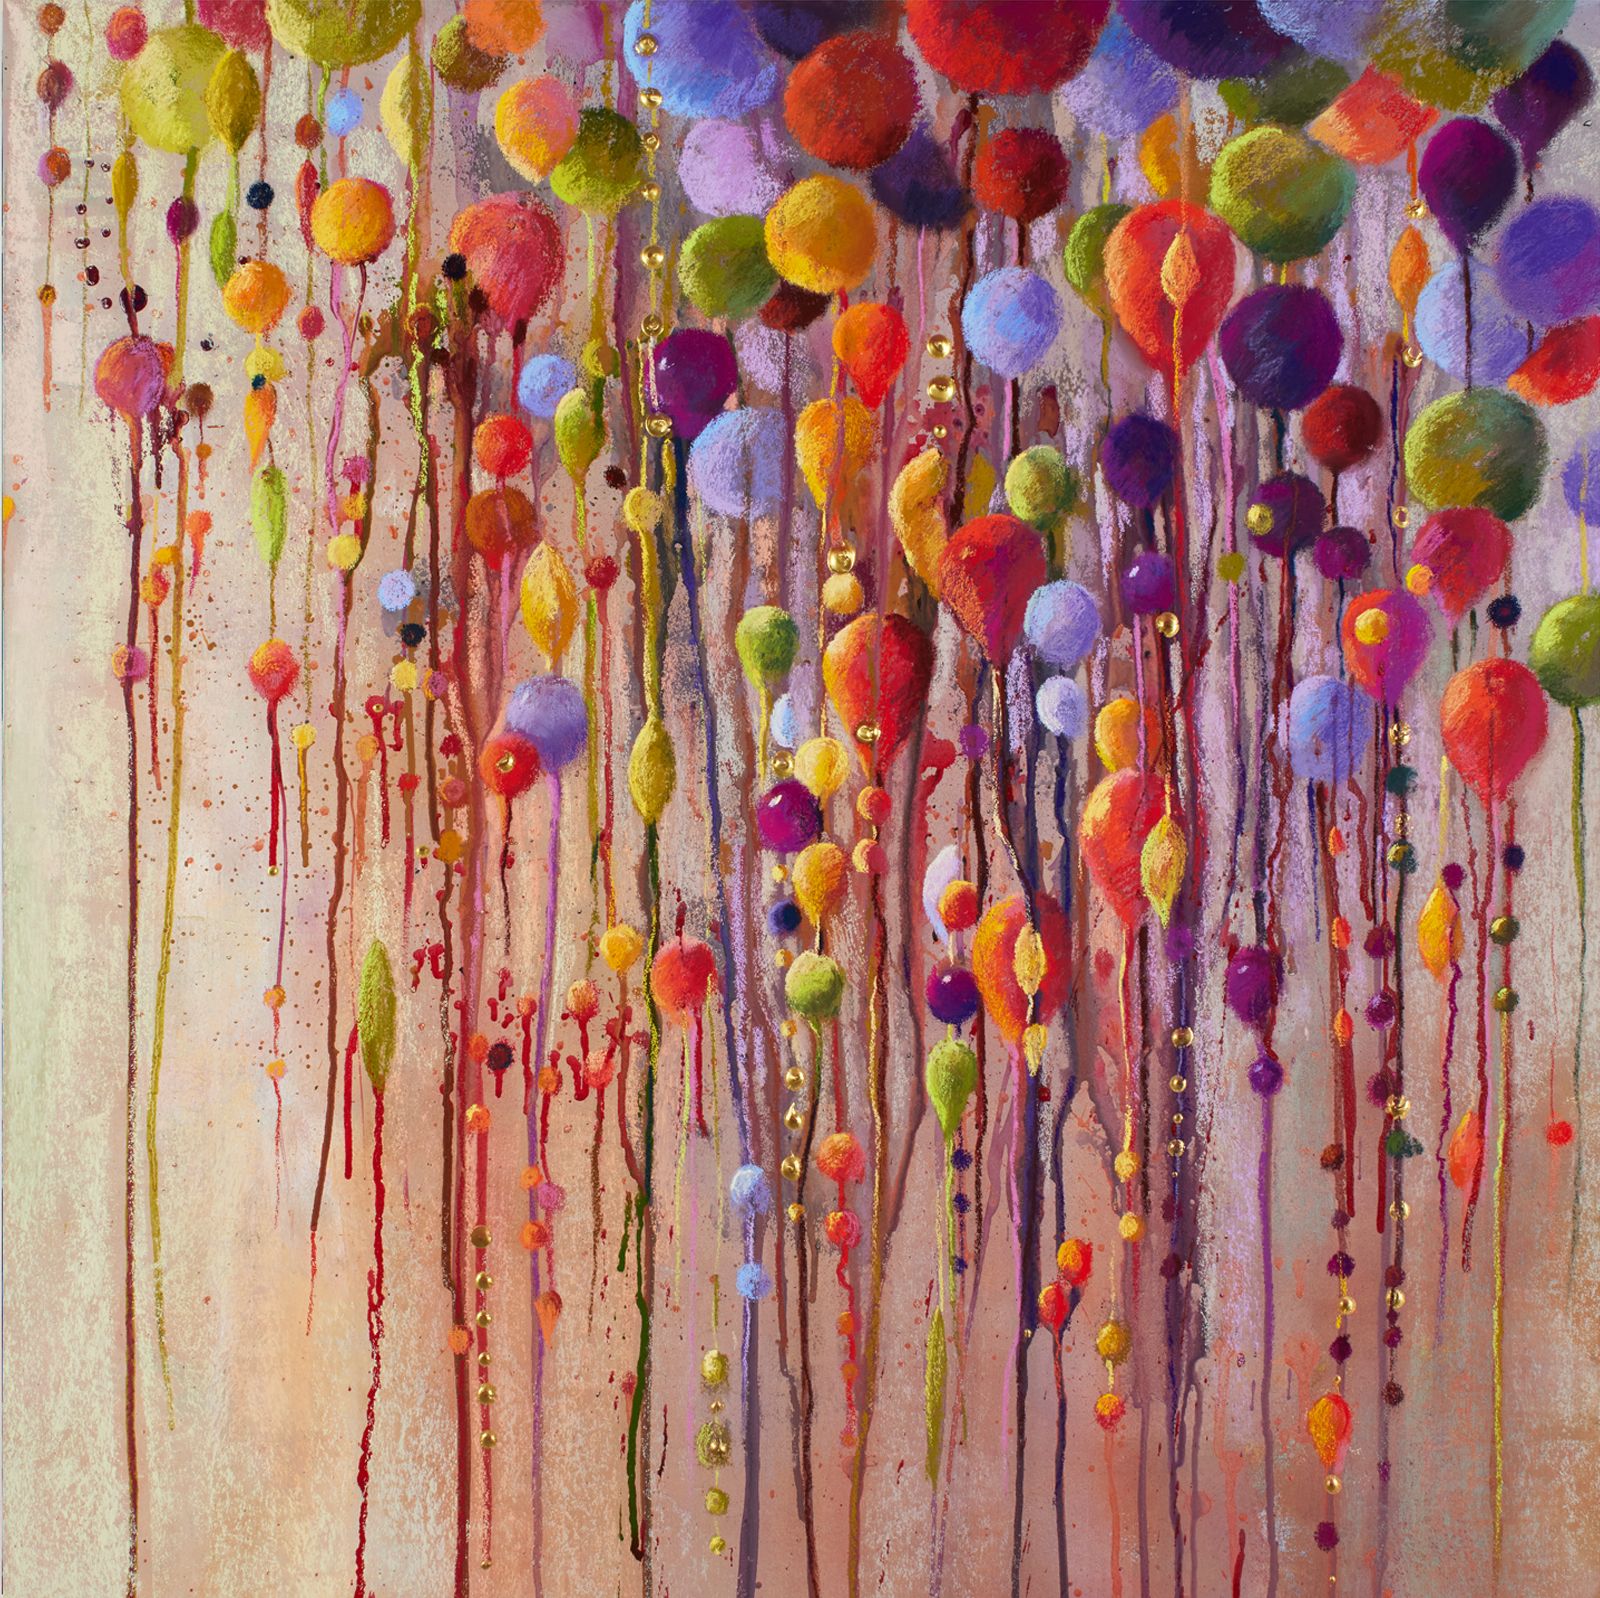 Nel Whatmore - 99 Red Balloons